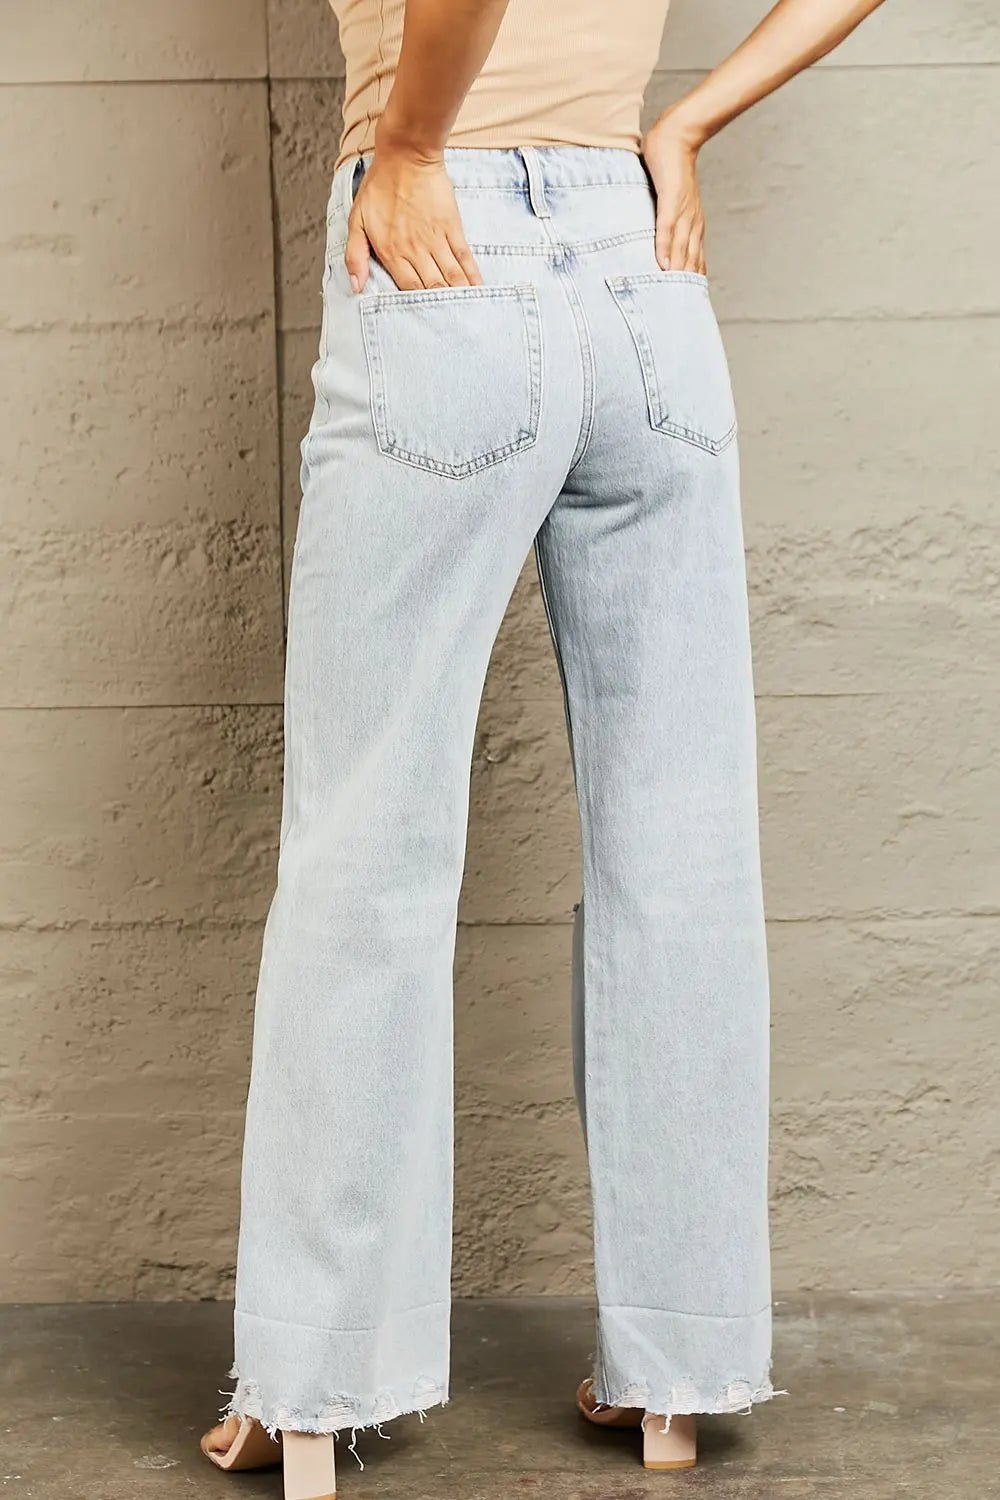 HIGH WAISTED WIDE LEG TROUSERS LOOSE FIT JEANS - MeadeuxHIGH WAISTED WIDE LEG TROUSERS LOOSE FIT JEANSJeansMeadeux